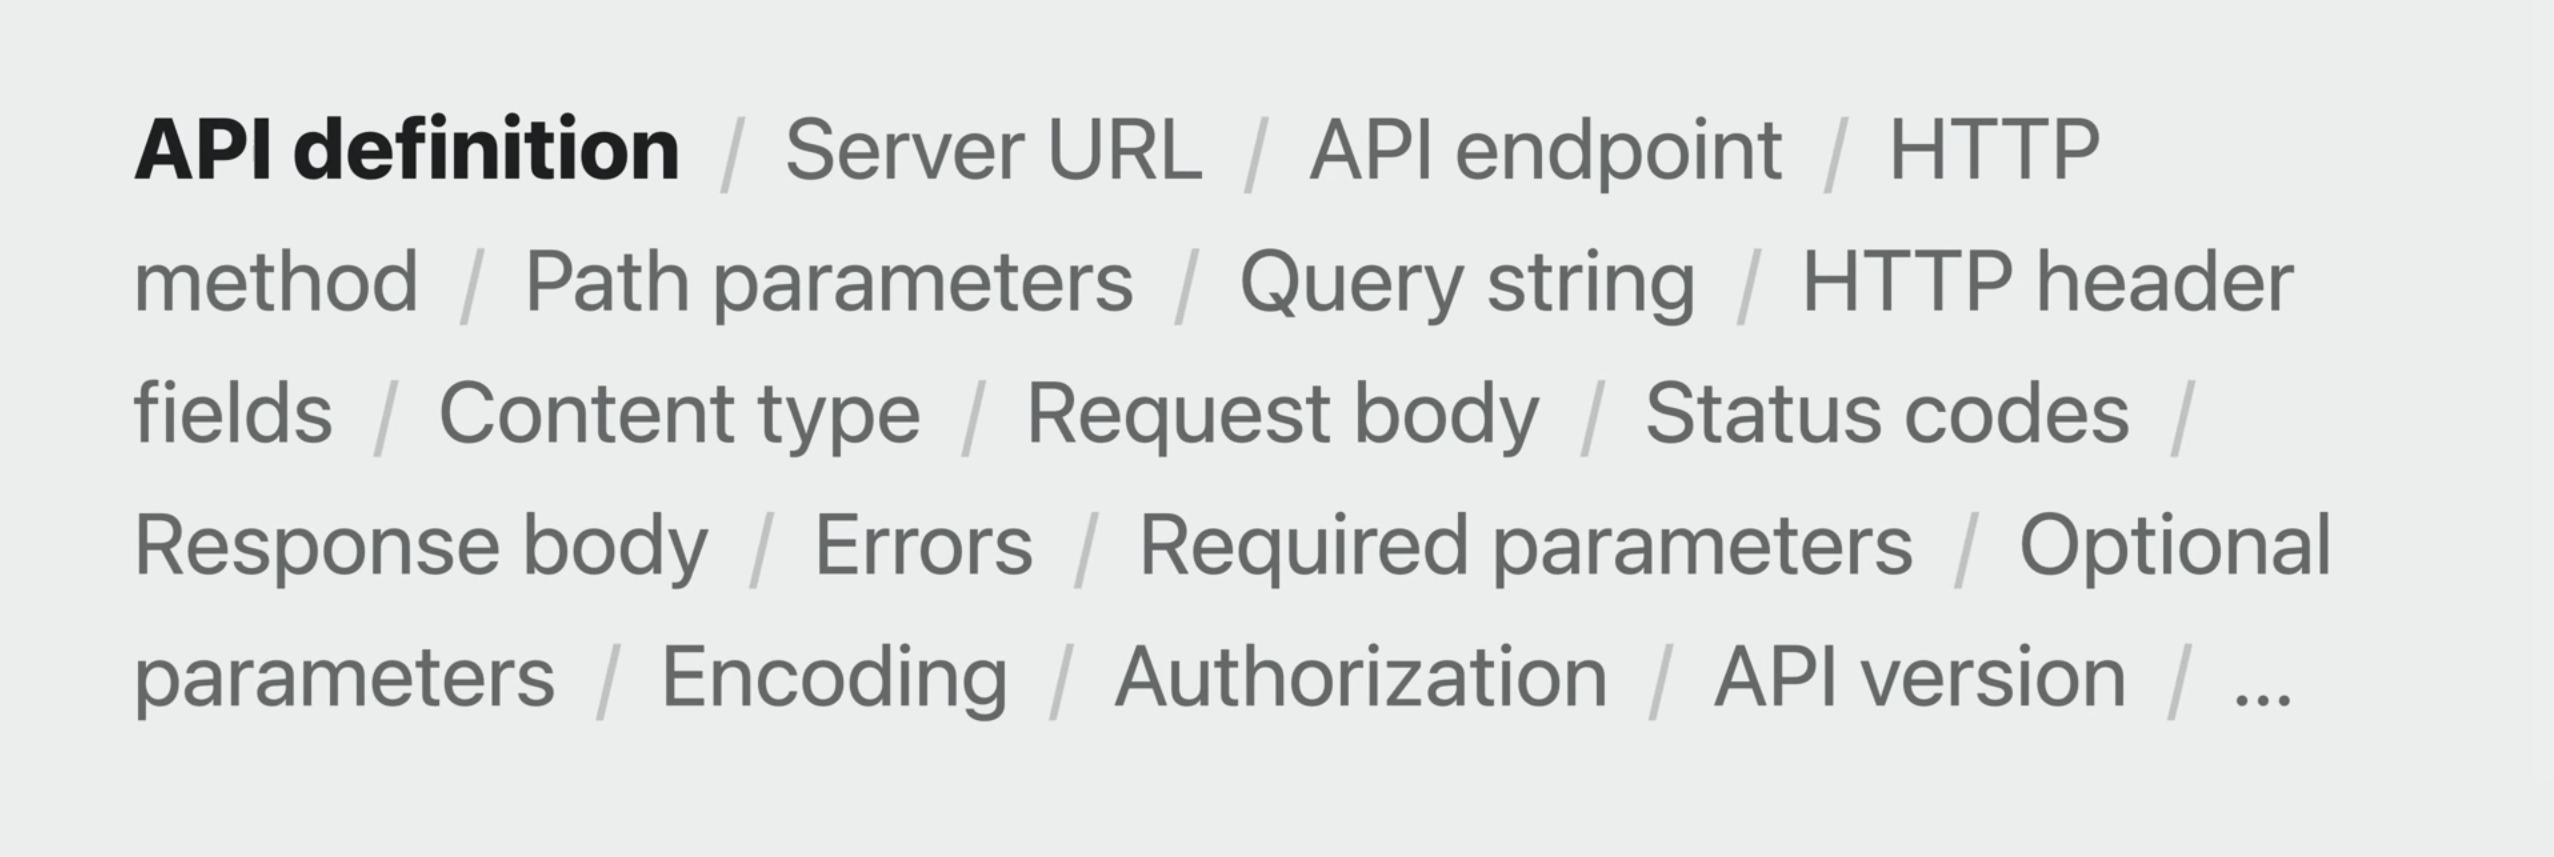 API definition: Serve URL, API endpoint, HTTP method, Path parameters, Query string, HTTP header fields, Content type, Request body, Status codes, Response body, Errors, Required parameters, Optional parameters, Encoding, Authorization, API version, ...